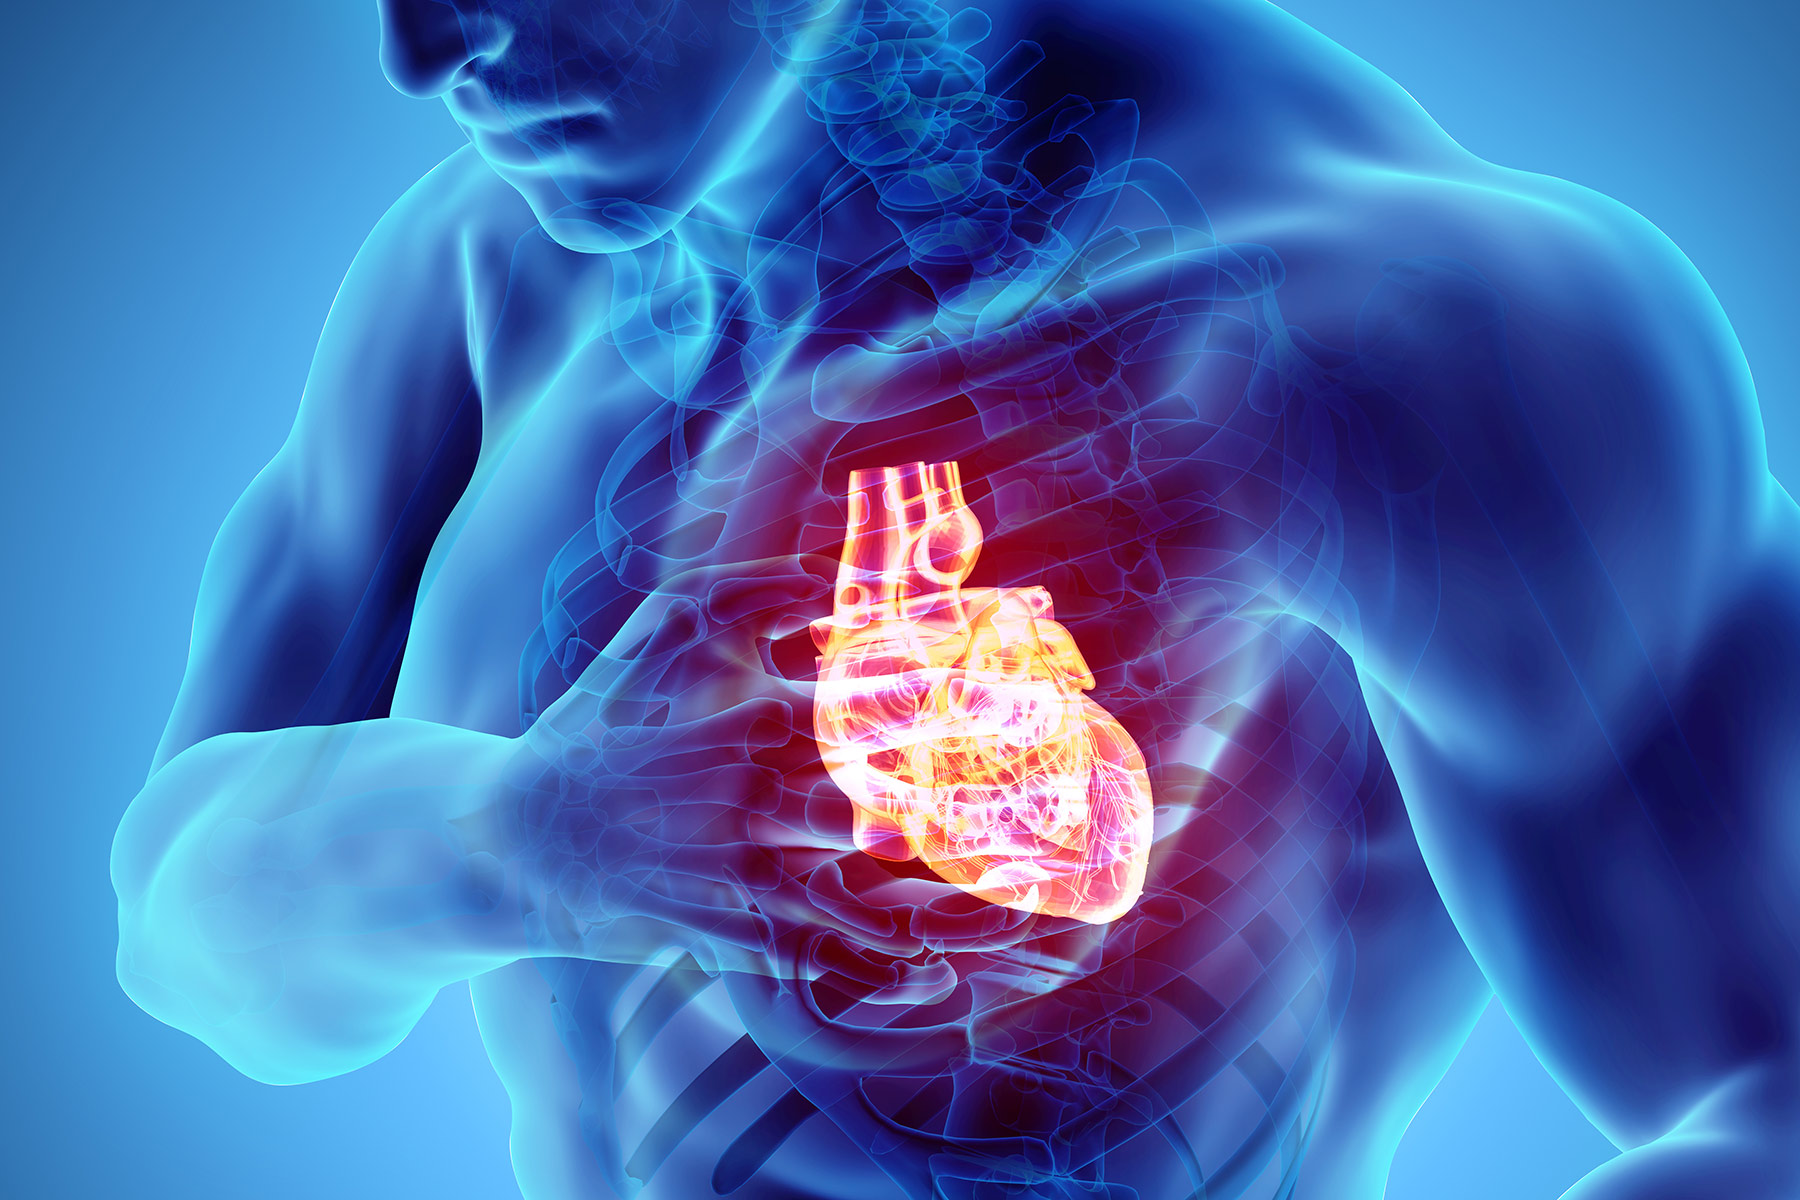 The chances of you surviving cardiac arrest are only between 5-10% with the proper application of life saving measures . people seem to be under the assumption that most people come back … They don’t…(a heart attack is blood being blocked from getting back to the heart while cardiac arrest is the heart altogether suddenly stops beating unexpectedly)